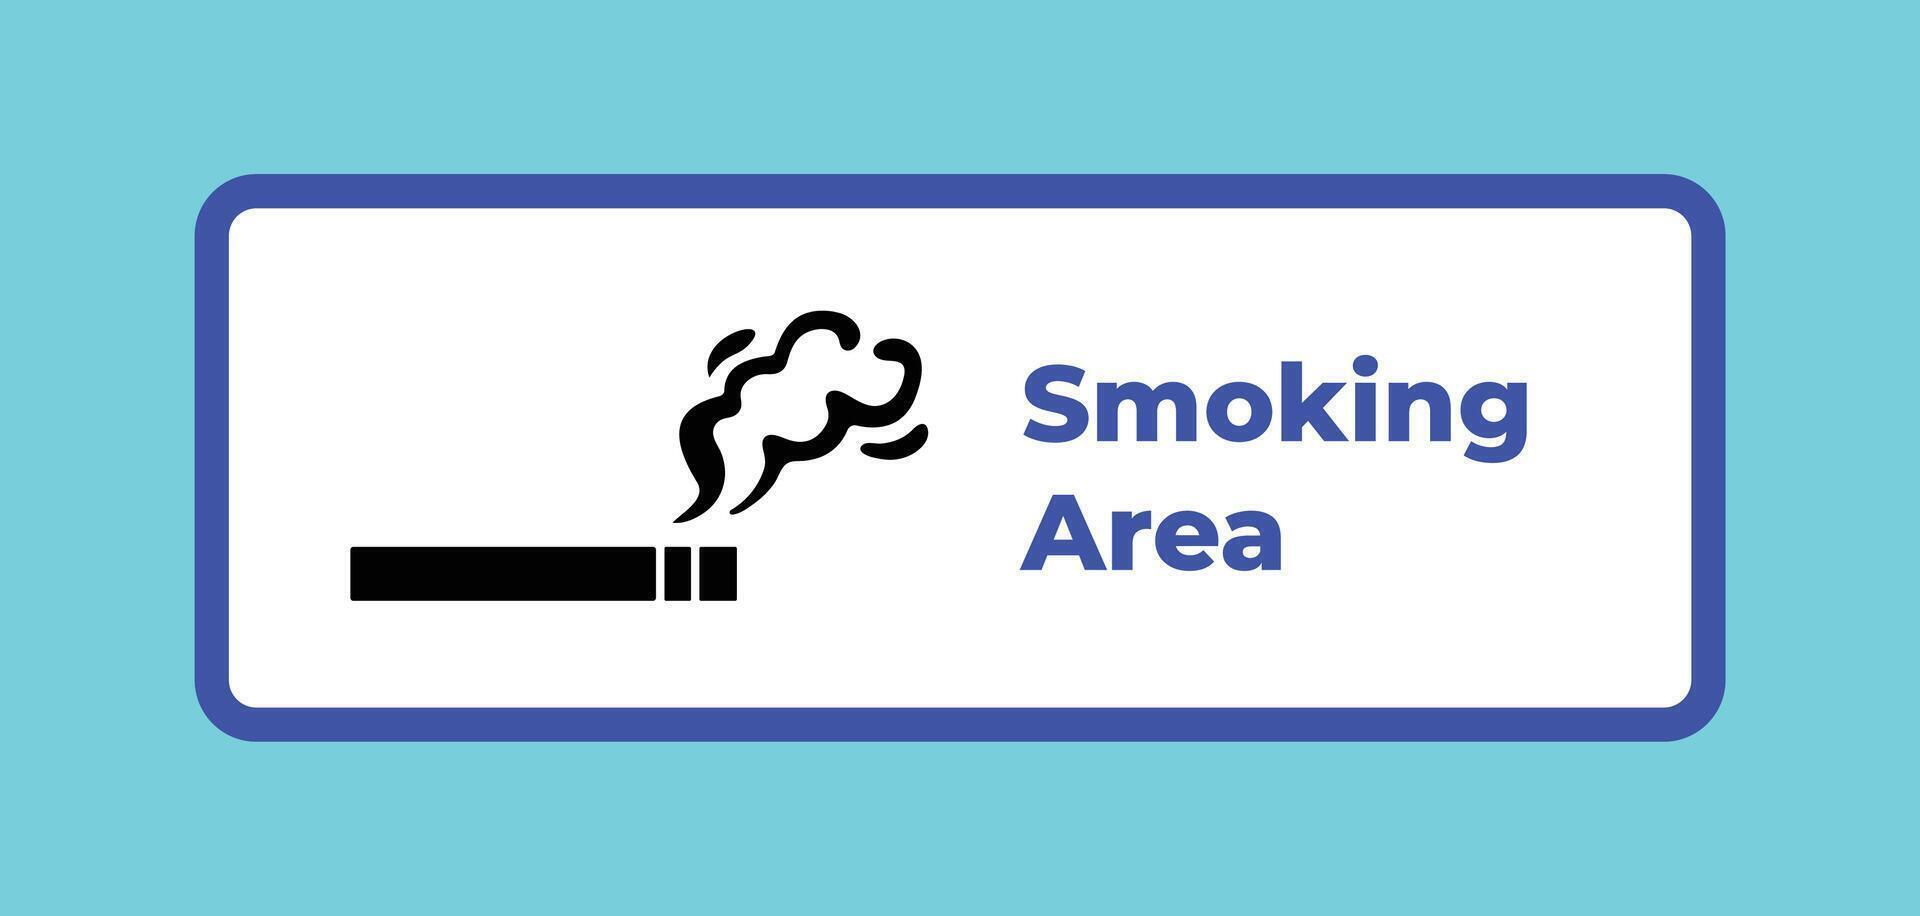 Designated smoking area cigarette sign age poster or sticker design illustration silhouette isolated on horizontal blue and white background. vector